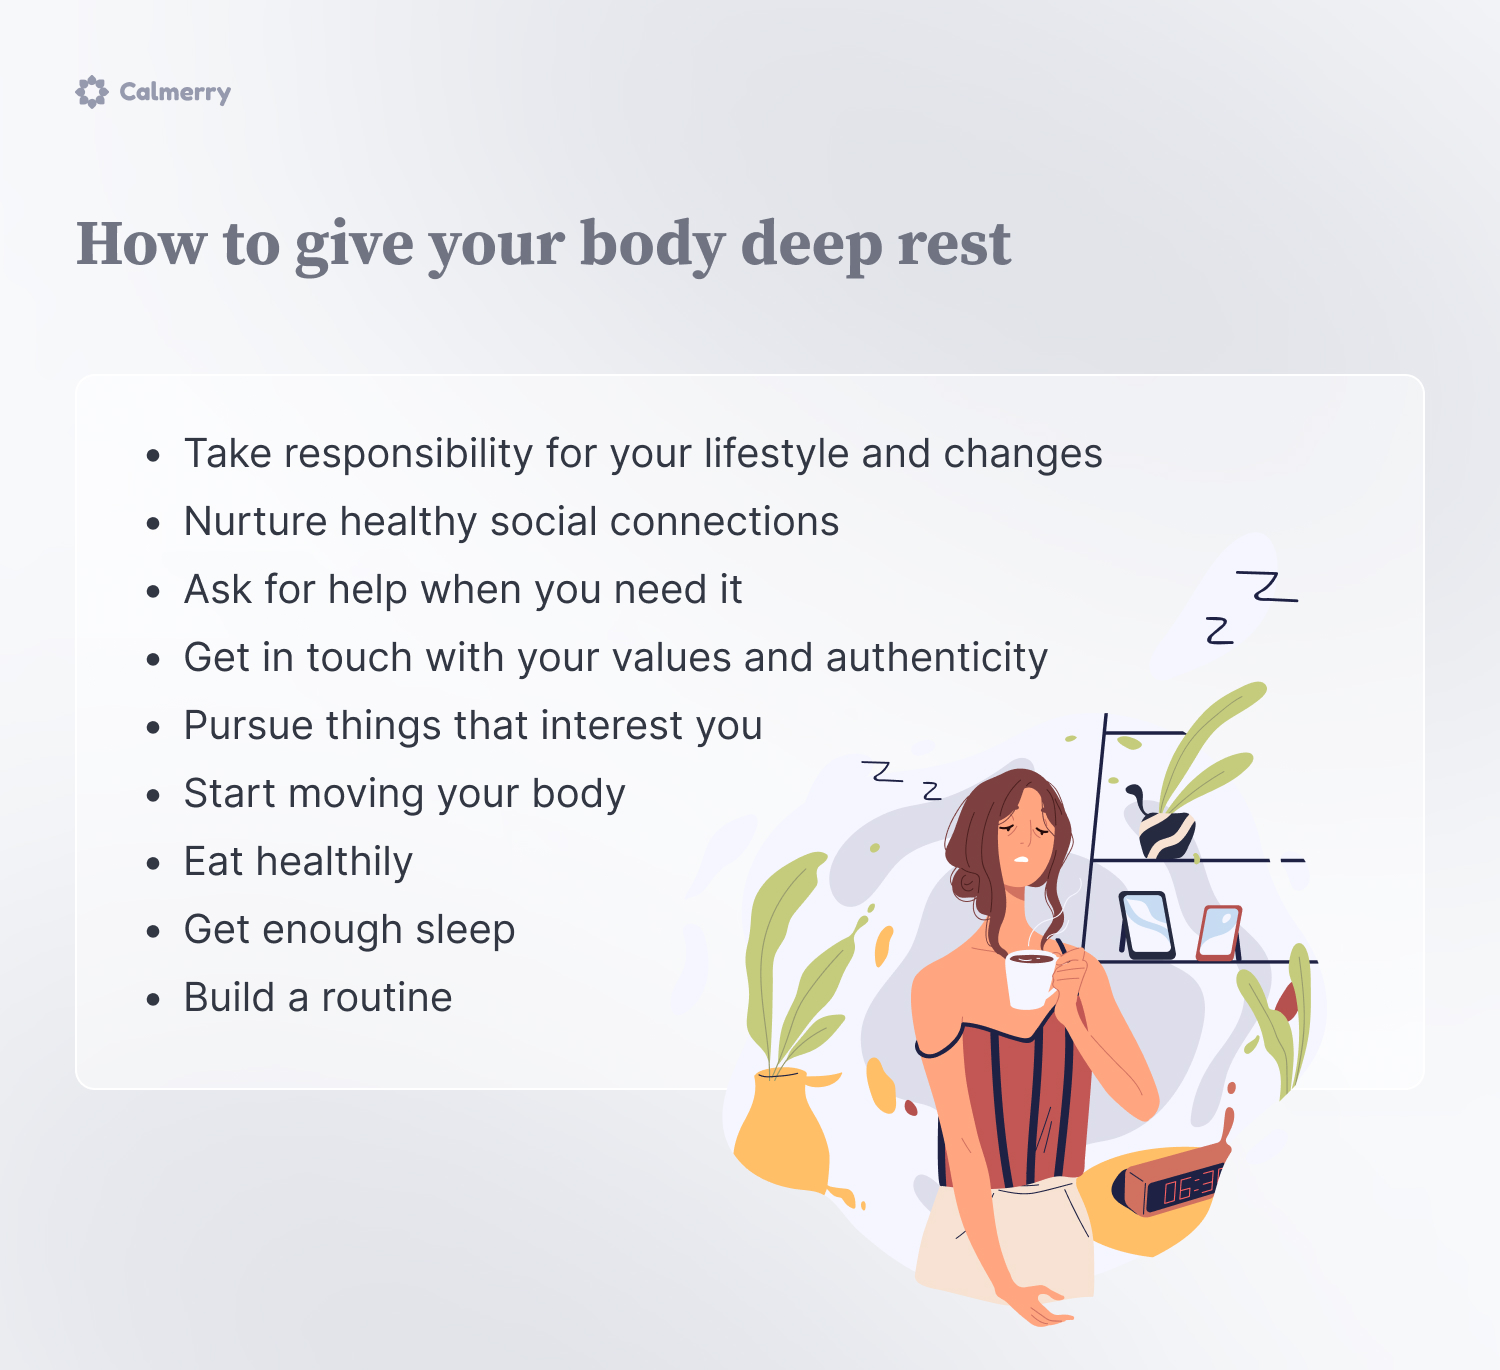 How to give your body deep rest
Take responsibility for your lifestyle and changes
Nurture healthy social connections
Ask for help when you need it
Get in touch with your values and authenticity 
Pursue things that interest you
Start moving your body
Eat healthily
Get enough sleep
Build a routine